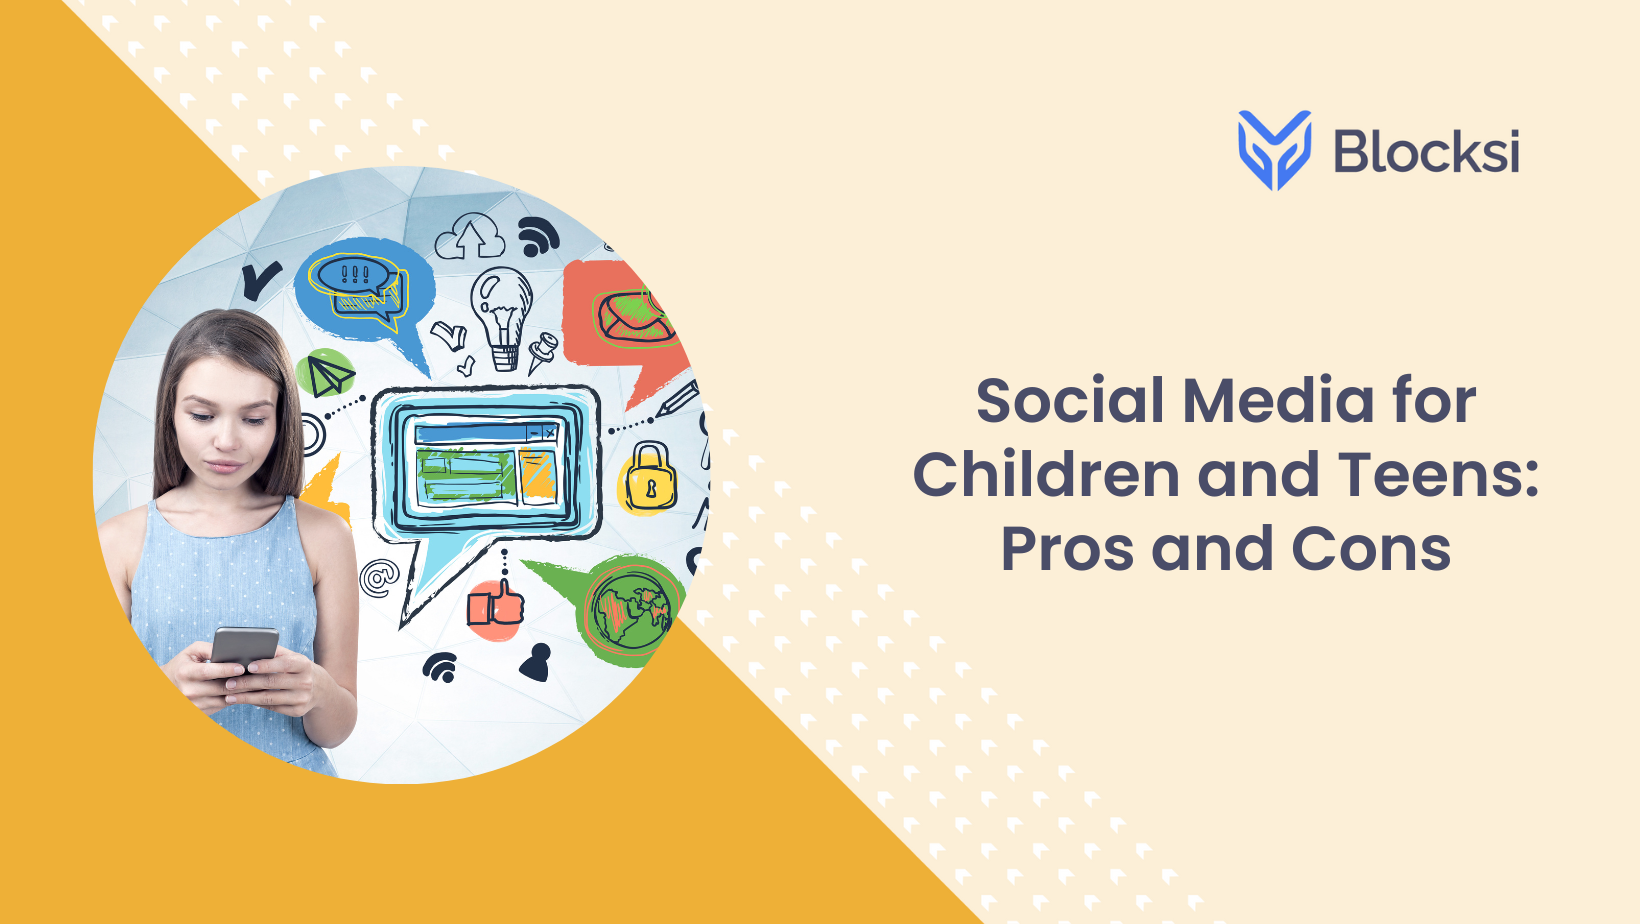 Social Media for Children and Teens: Pros and Cons